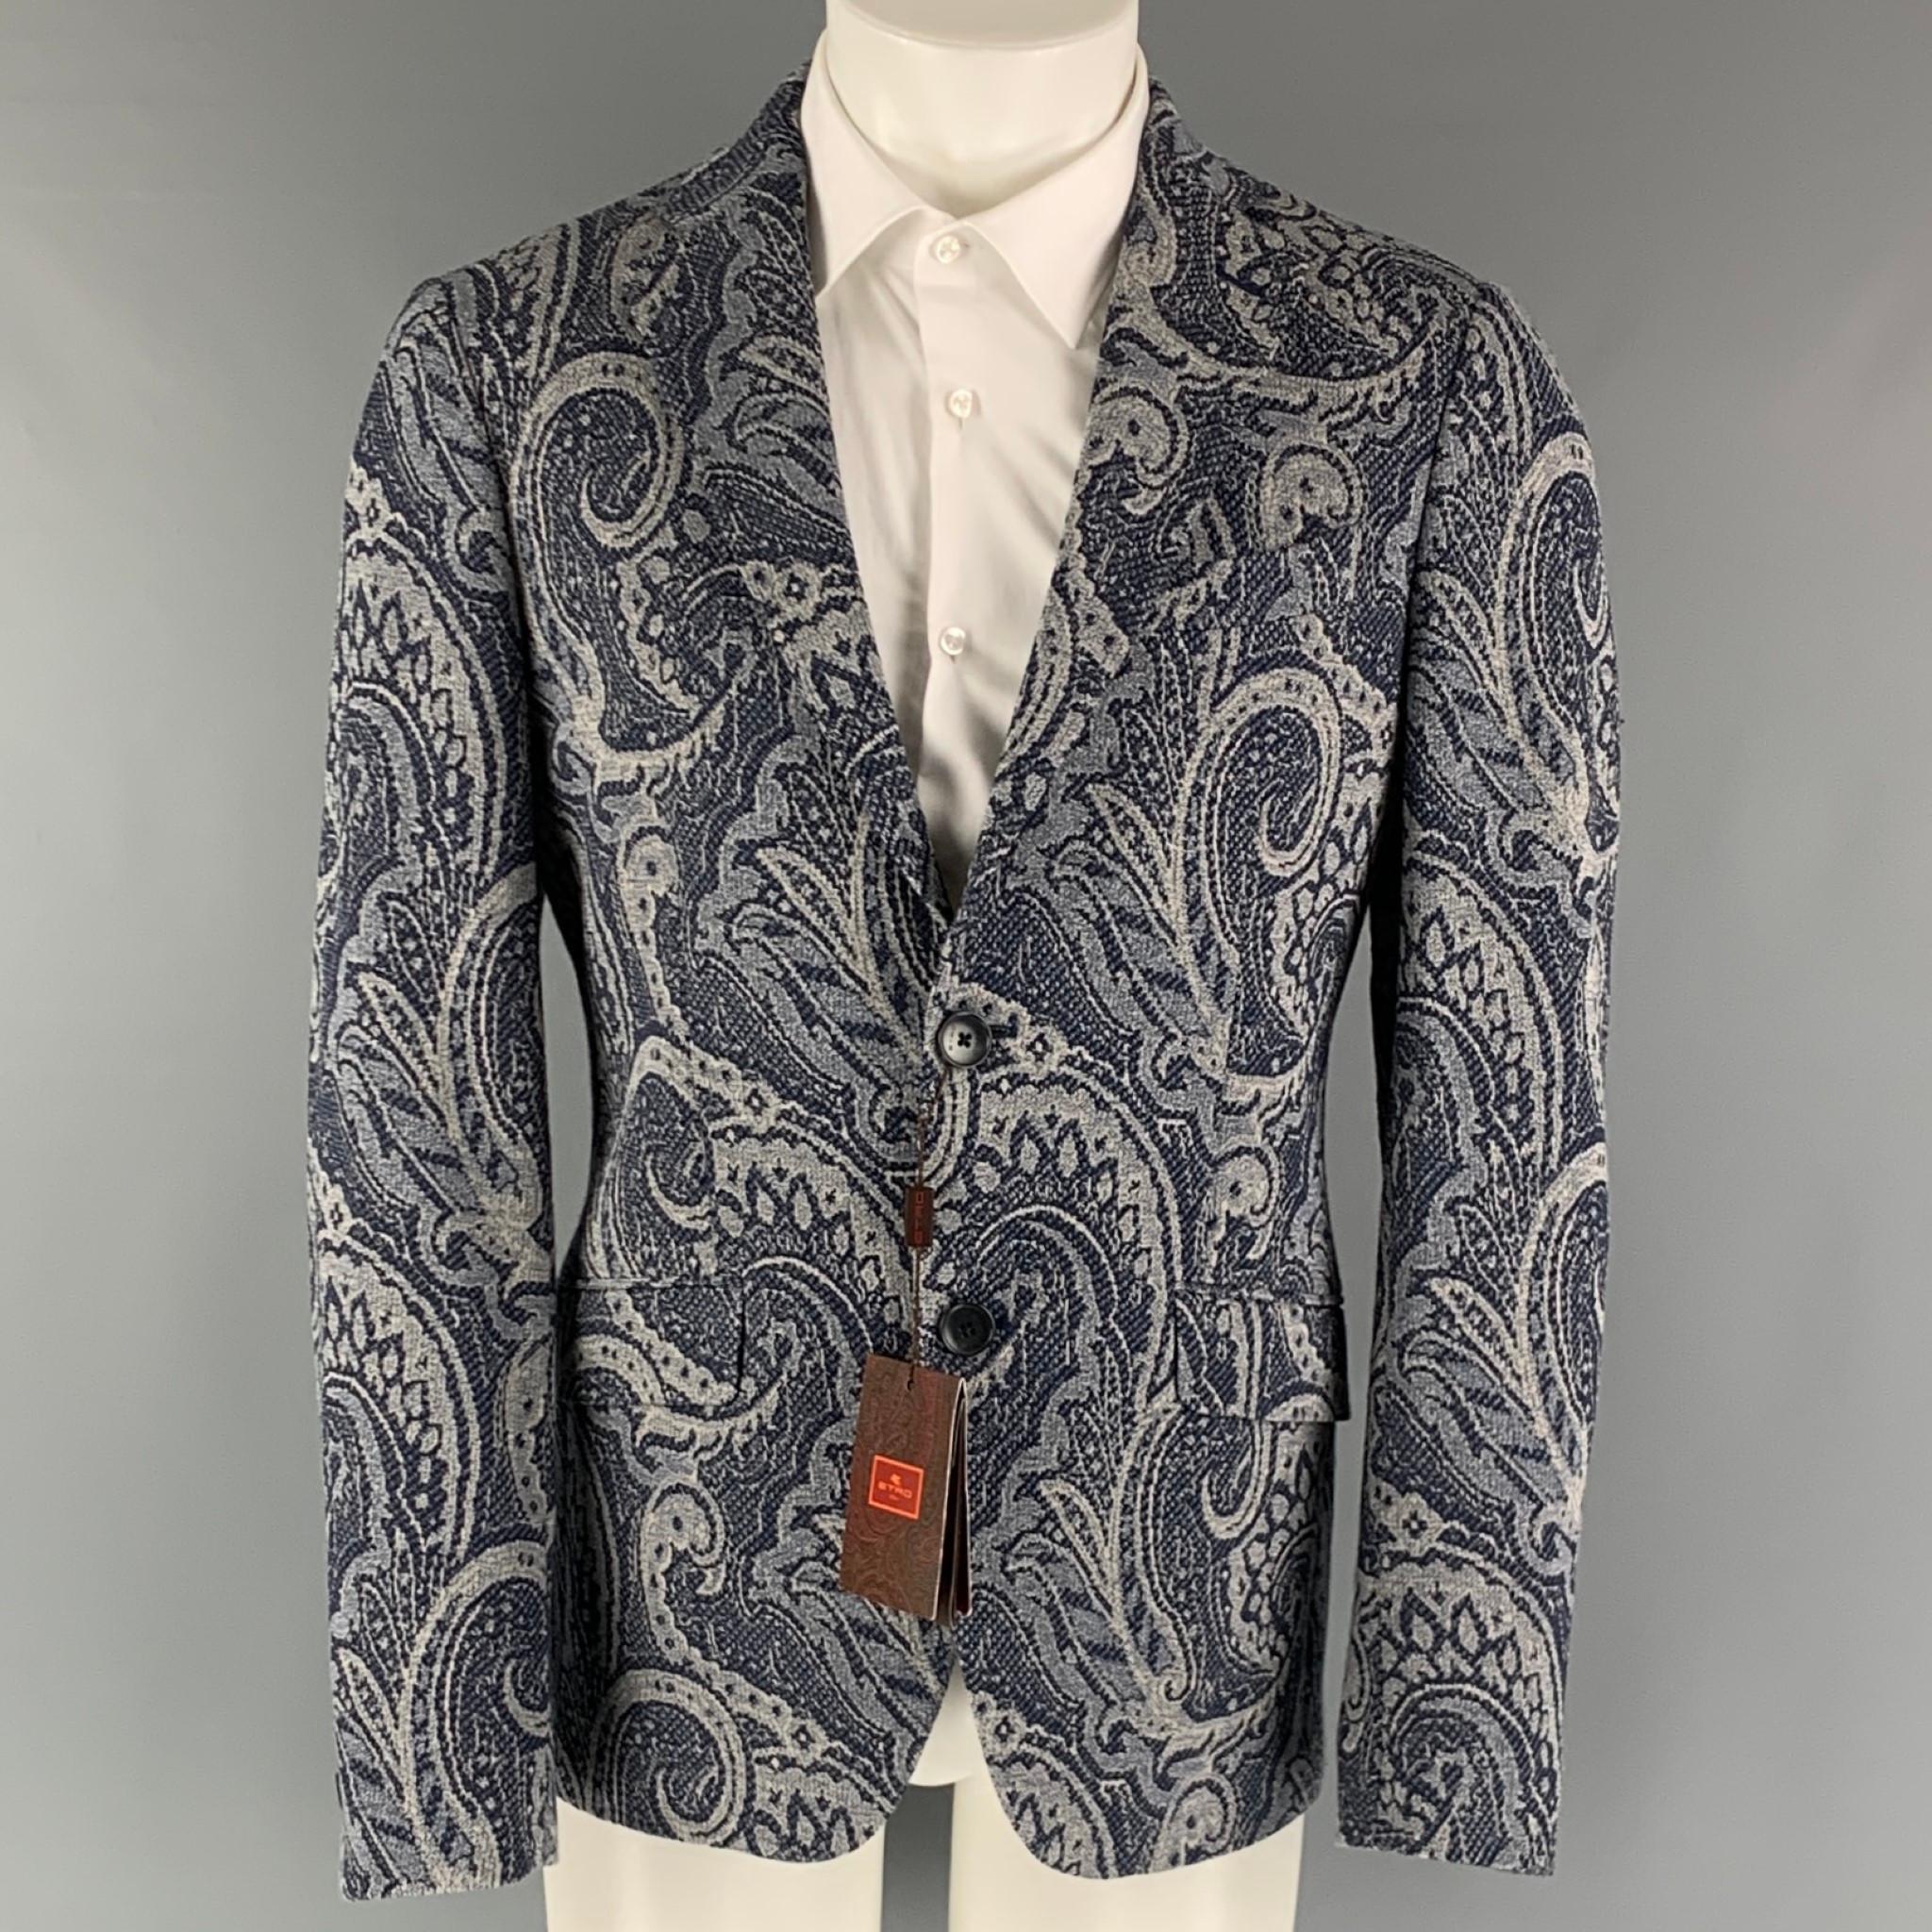 ETRO sport coat comes in a navy and white cotton blend jacquard woven material with a full lining featuring a notch lapel, patch pockets, paisley motif, double back vent, and a two button closure. Made in Italy.

New with Tags.
Marked: IT